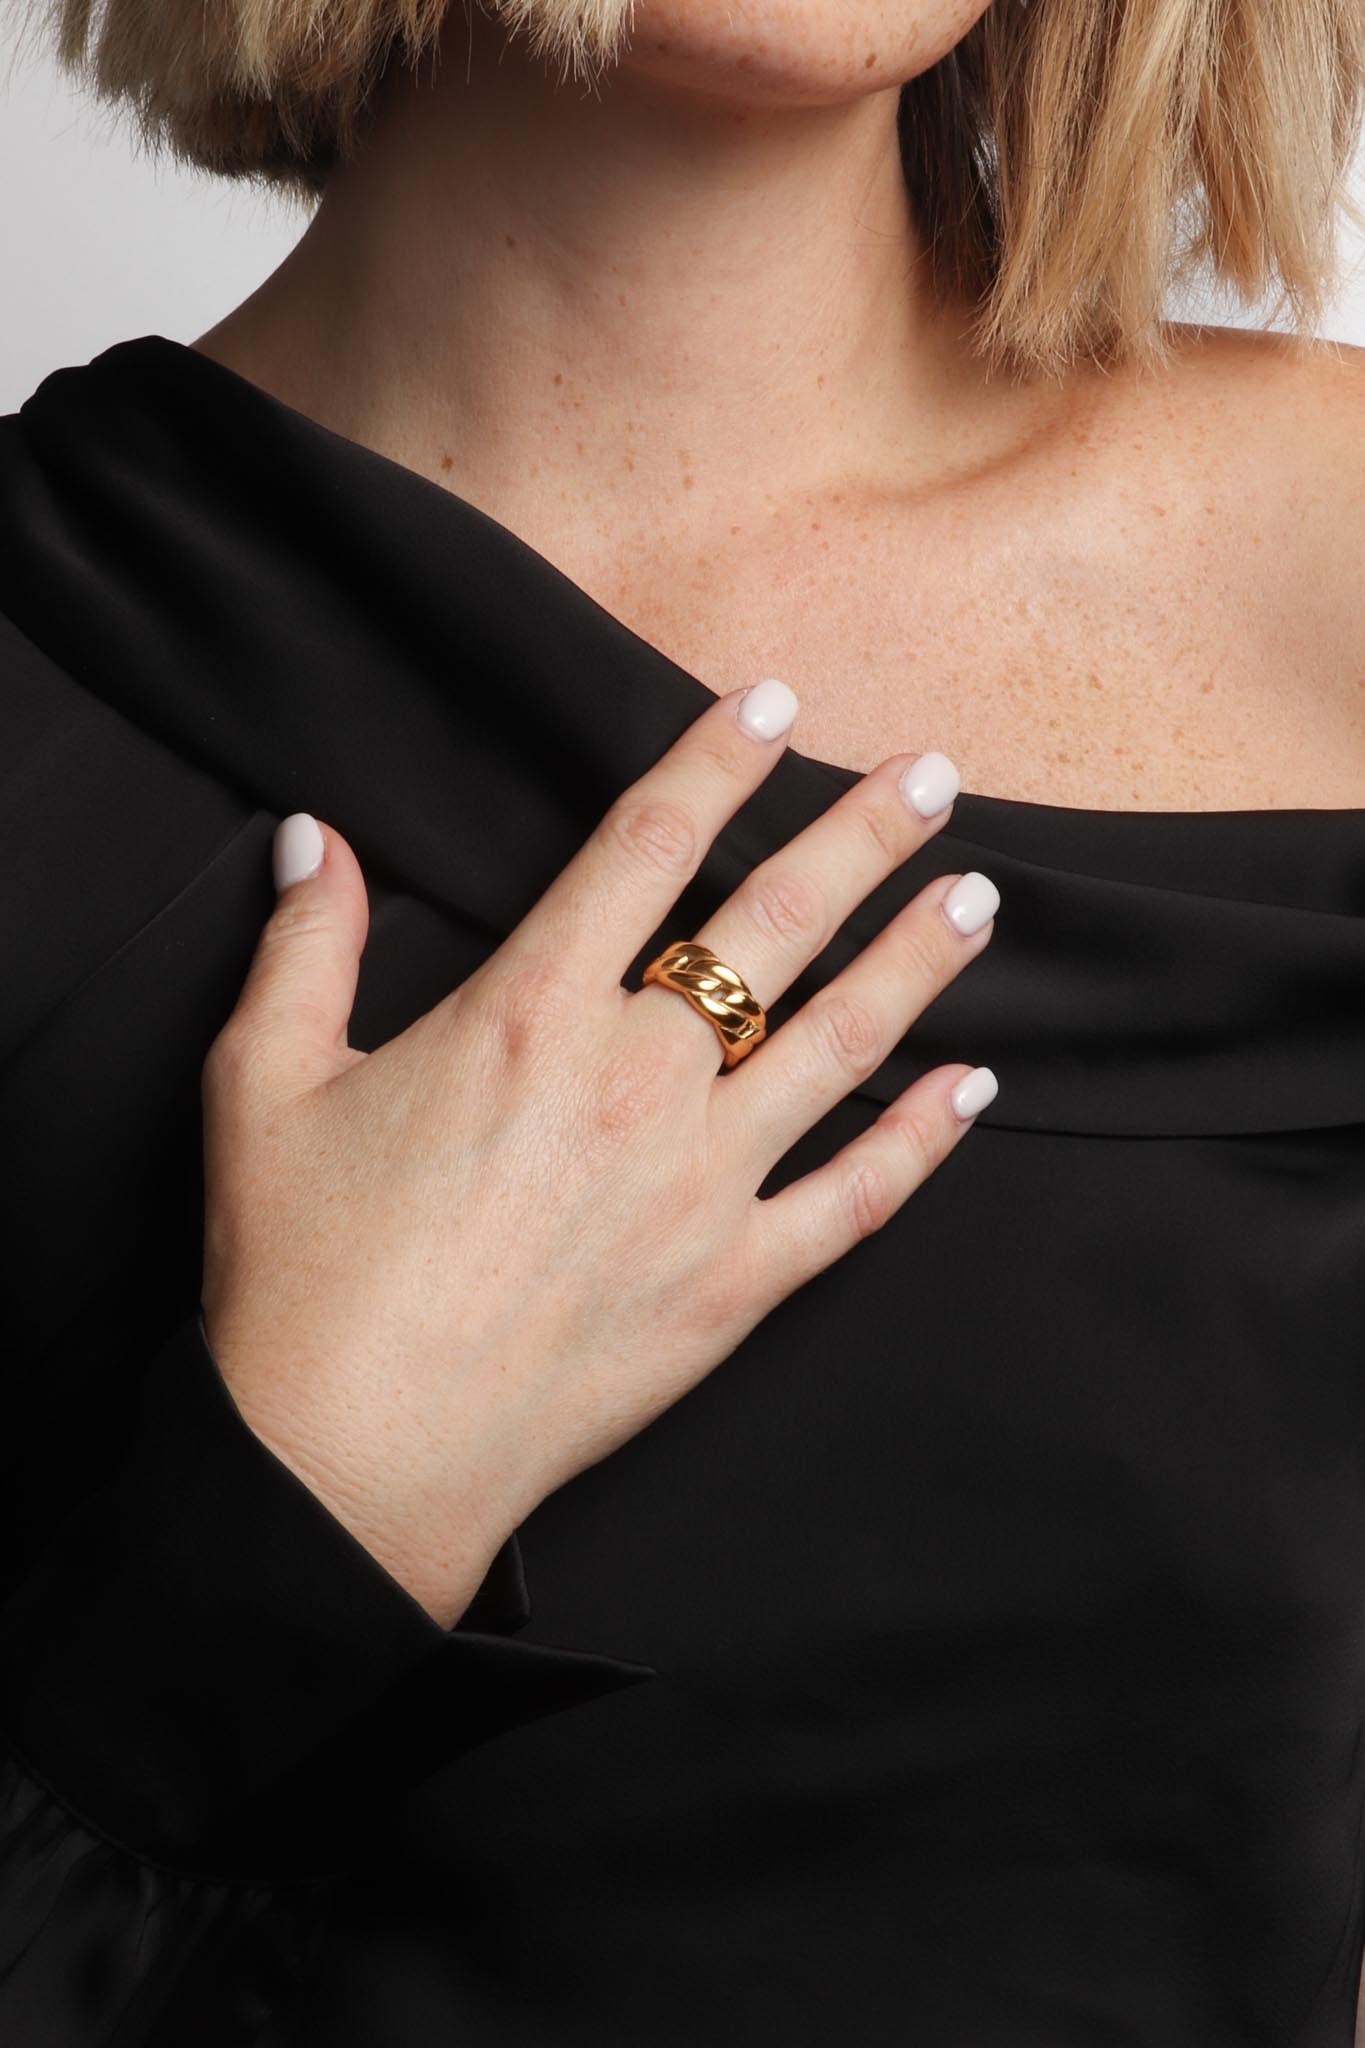 Marrin Costello wearing Marrin Costello Jewelry Queens Band cuban link statement ring. Available in sizes 6, 7, 8. Waterproof, sustainable, hypoallergenic. 14k gold plated stainless steel.